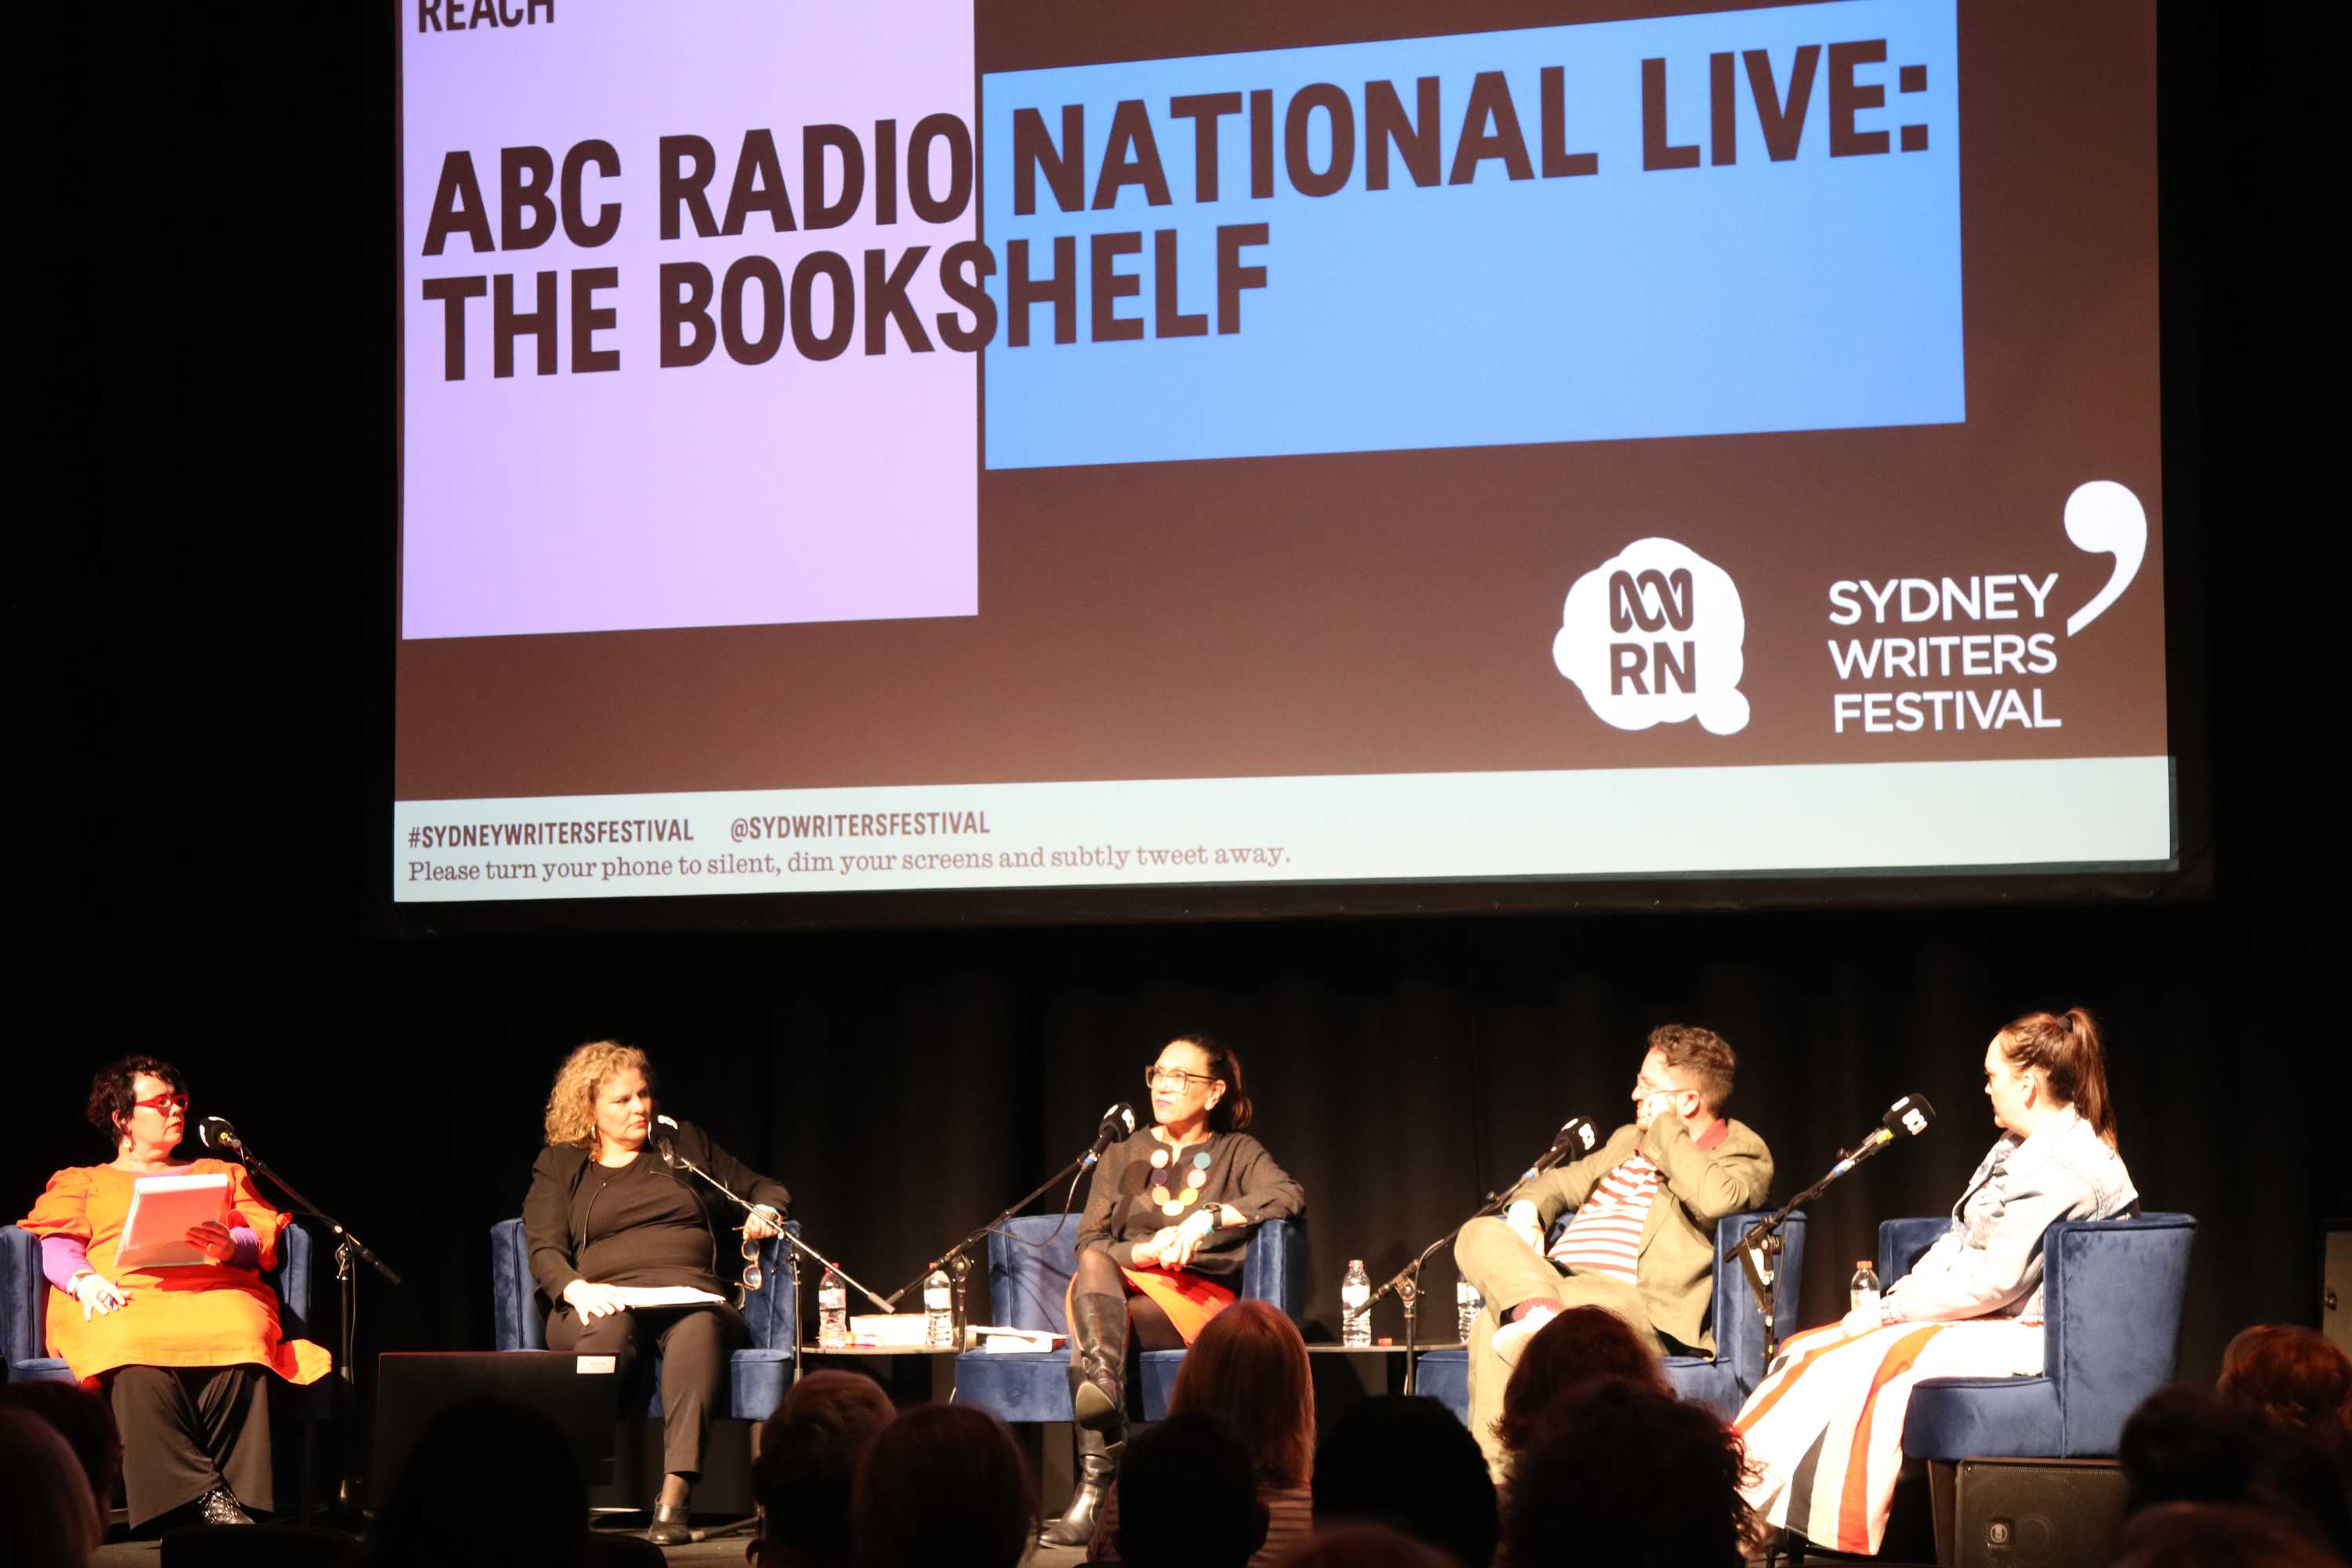 Live from the Sydney Writers Festival with Anita Heiss, Rick Morton and Emily Maguire